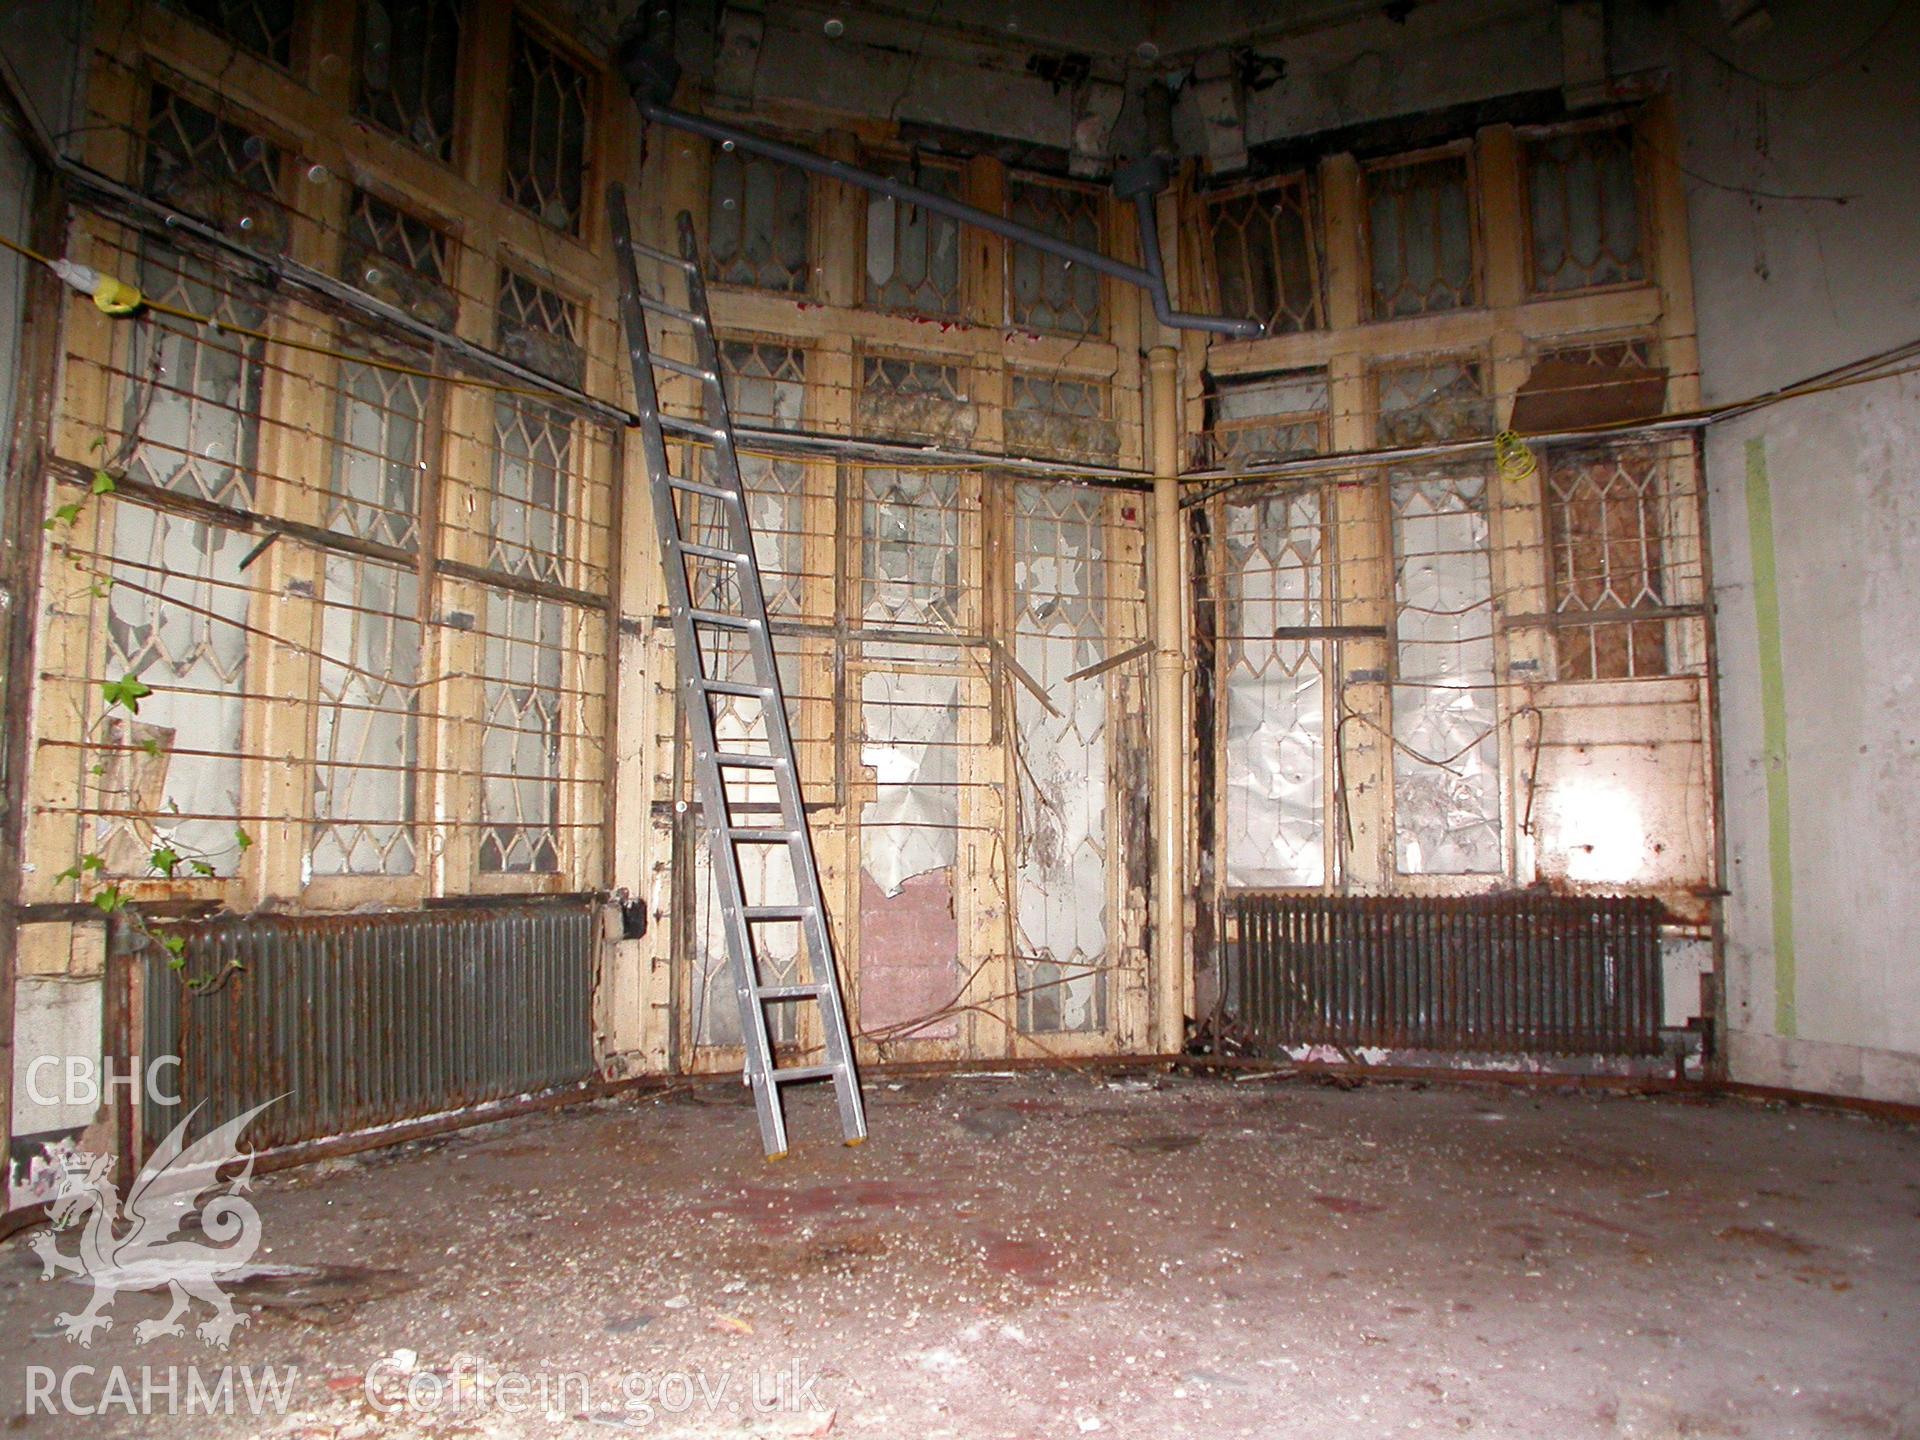 Ground floor room to the rear of the halls at Malpas Court, looking south-east.